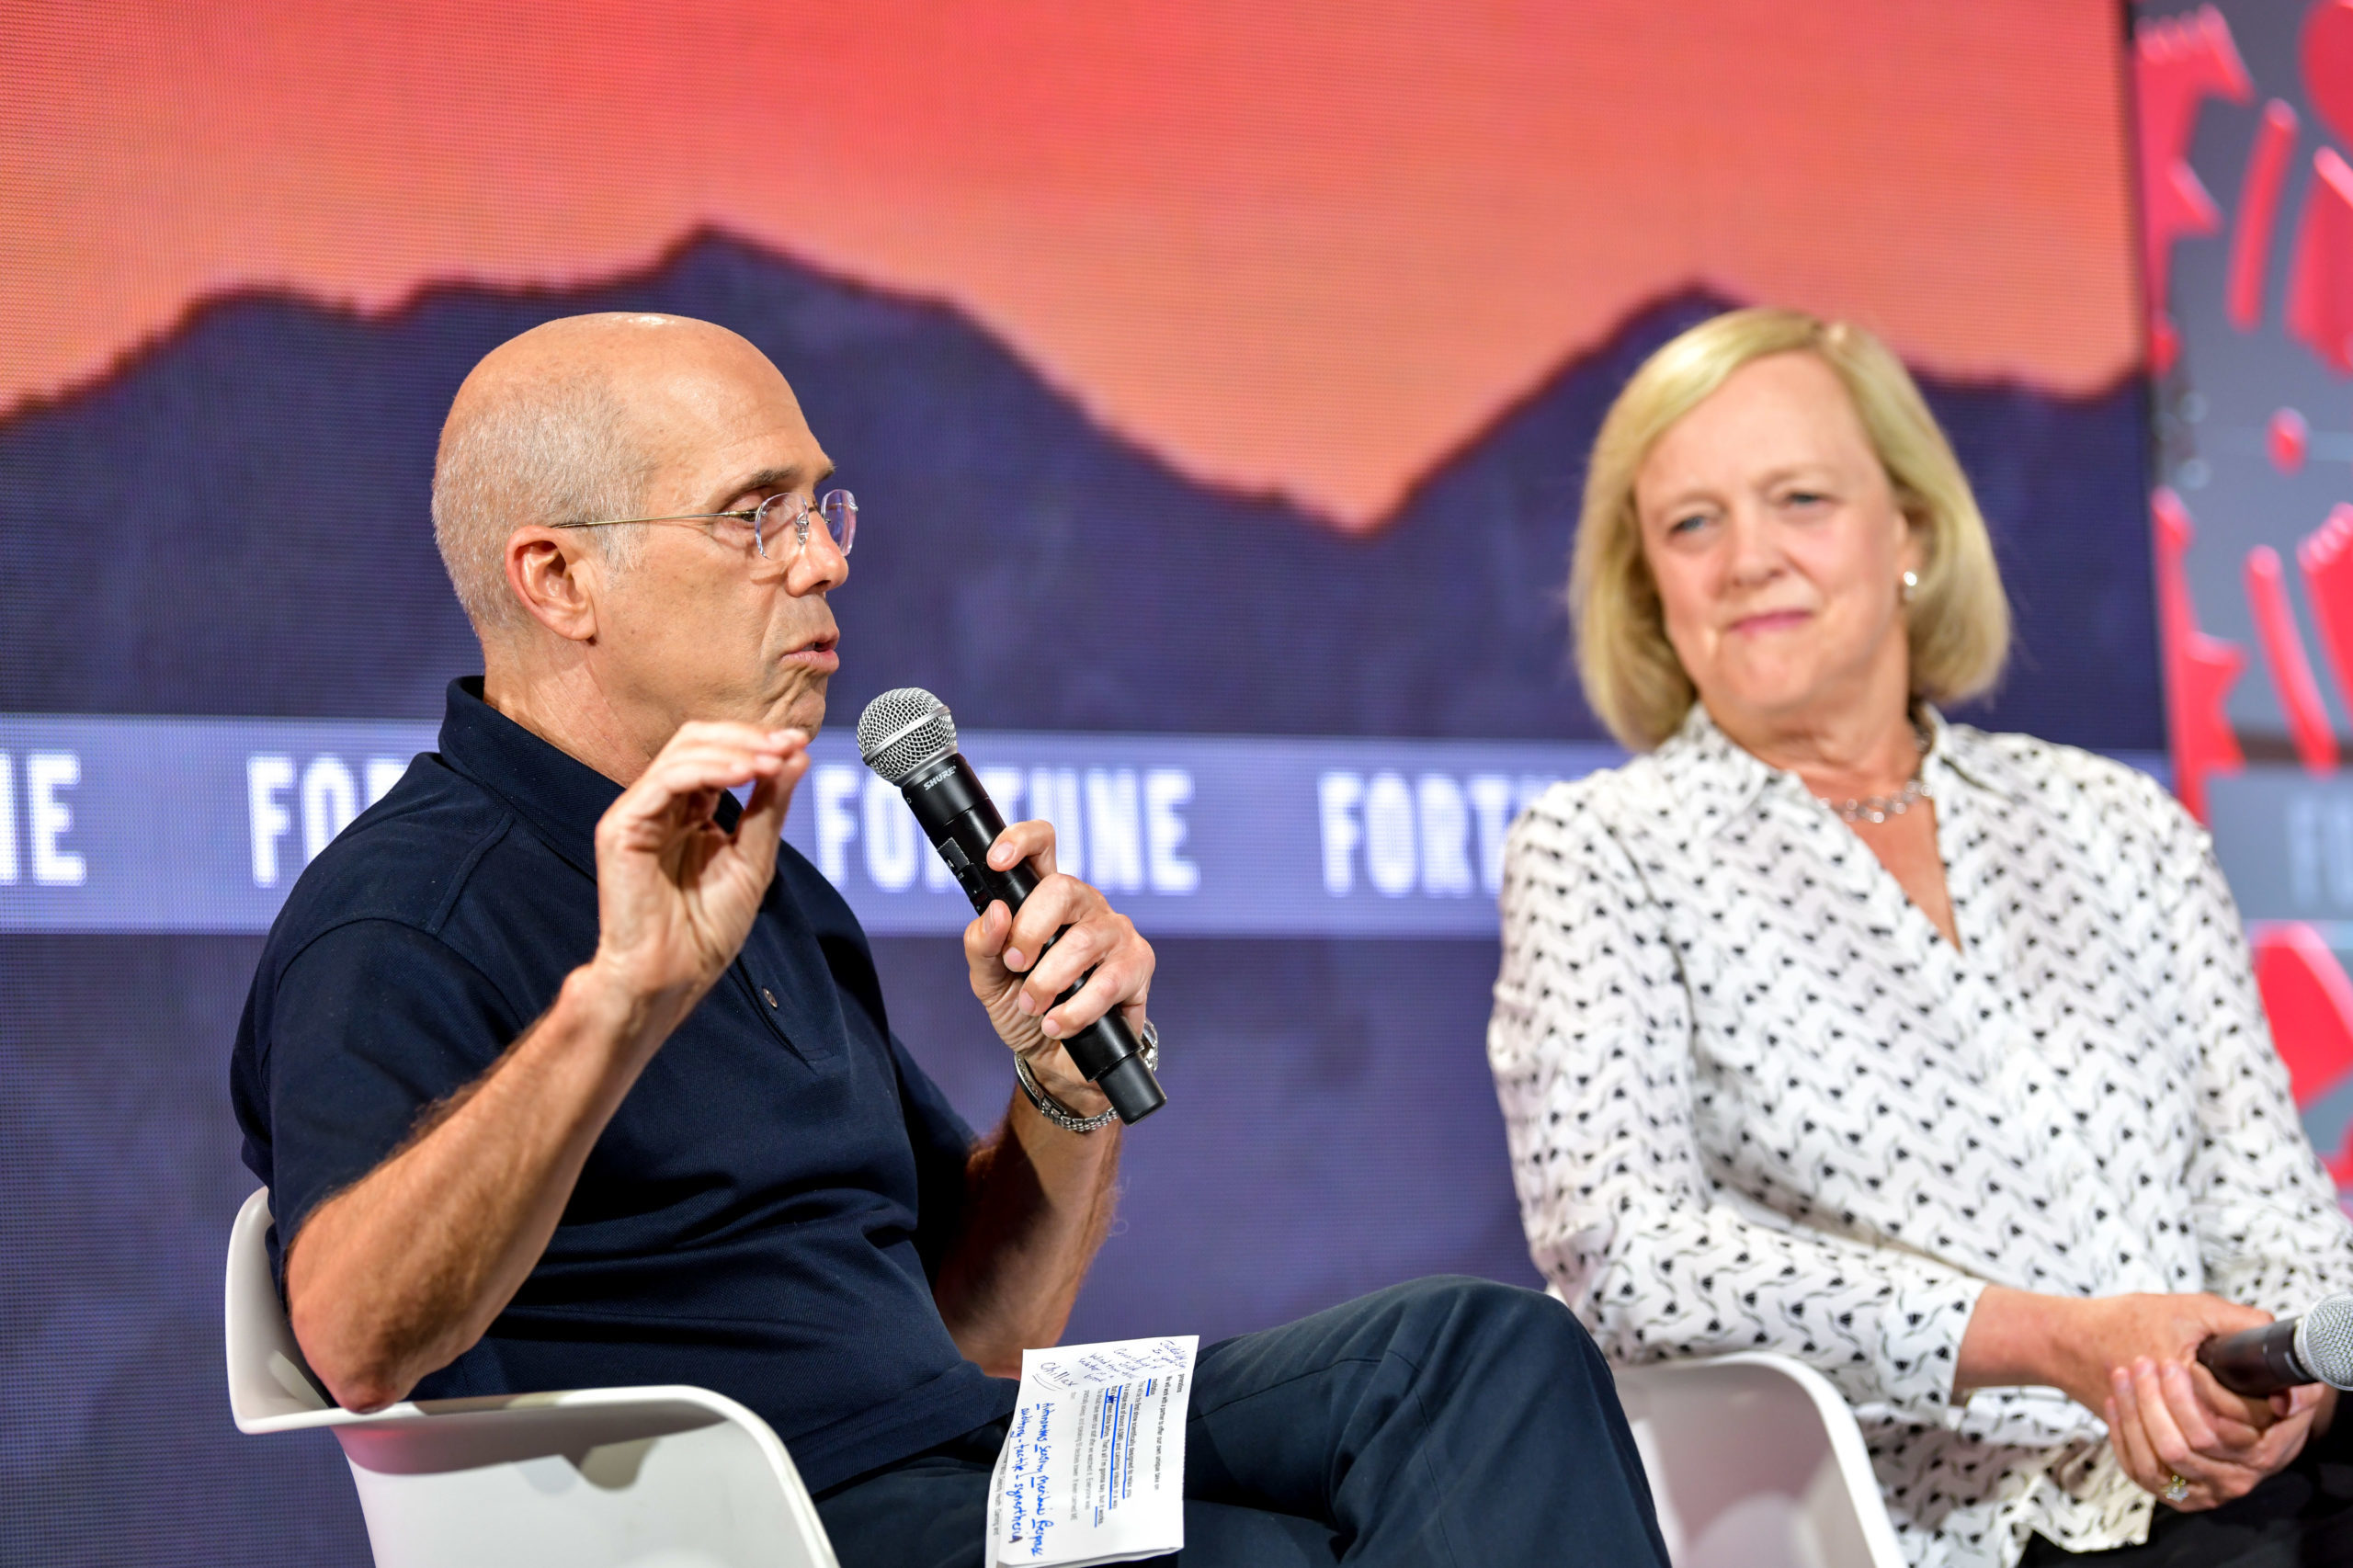 Quibi founder Jeffrey Katzenberg and CEO Meg Whitman appear a Fortune Brainstorm TECH conference on July 16, 2019 in Aspen, CO